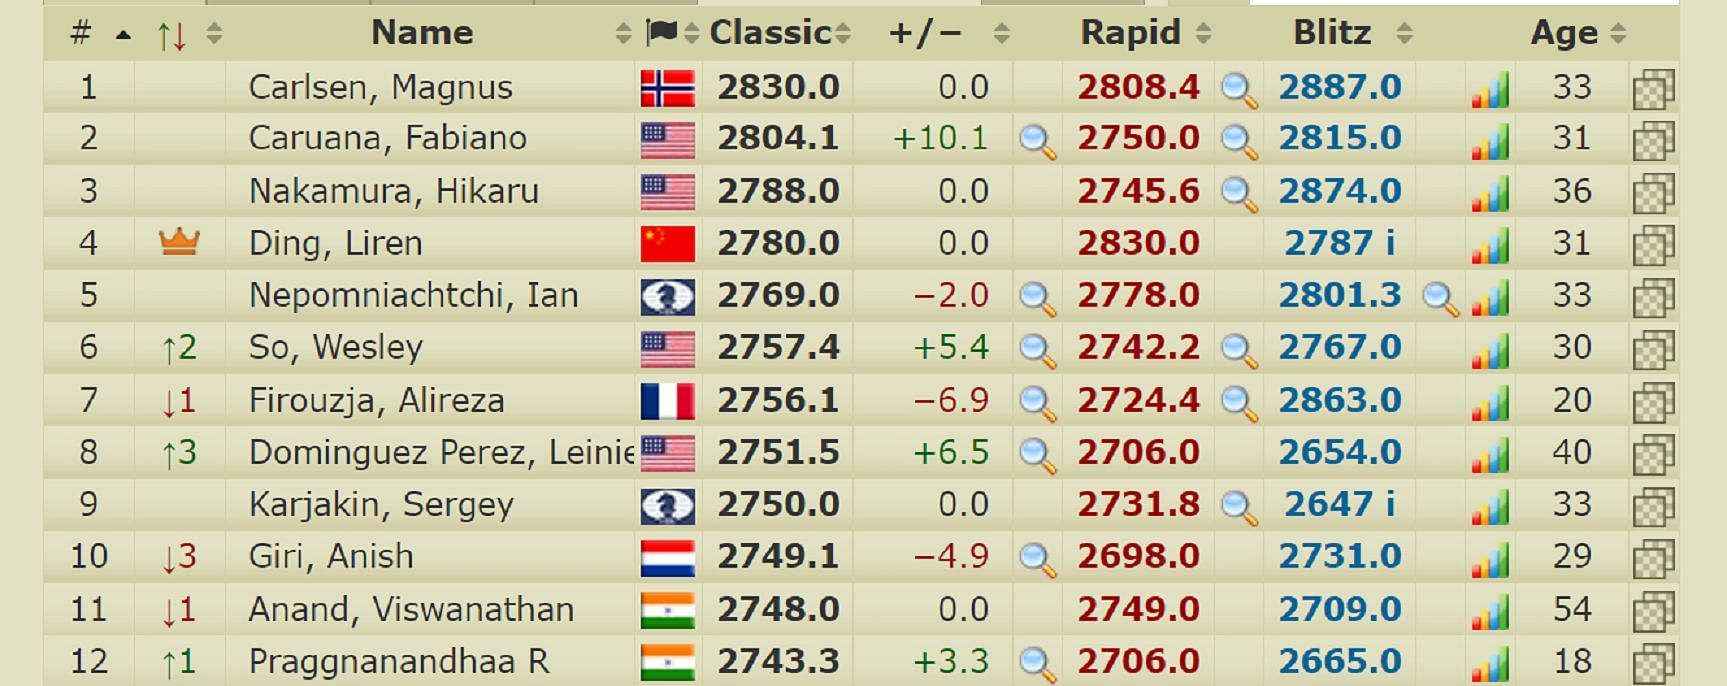 Live FIDE ratings of the top 12 players in the world (Image via 2700chess.com)